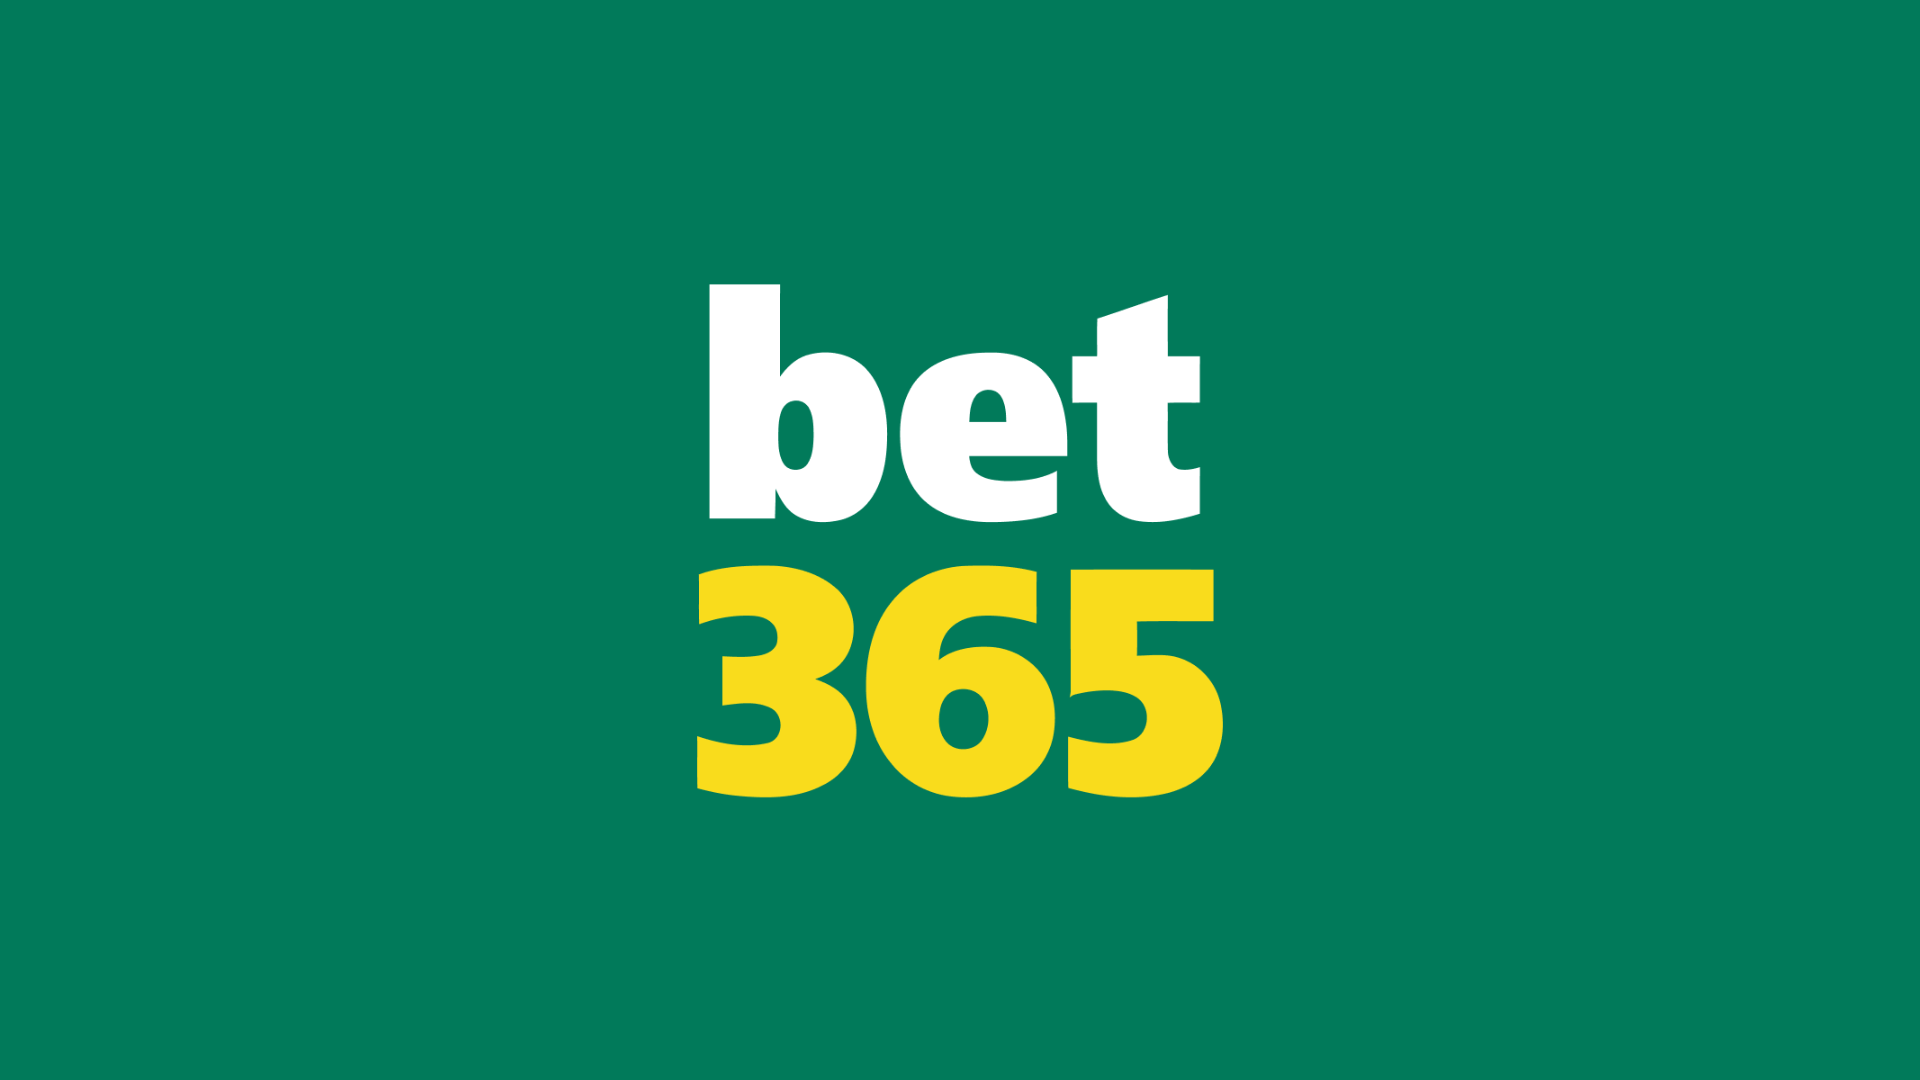 bet365 Champions League Sign Up Offer – Bet £10 Get £30 in Free Bets